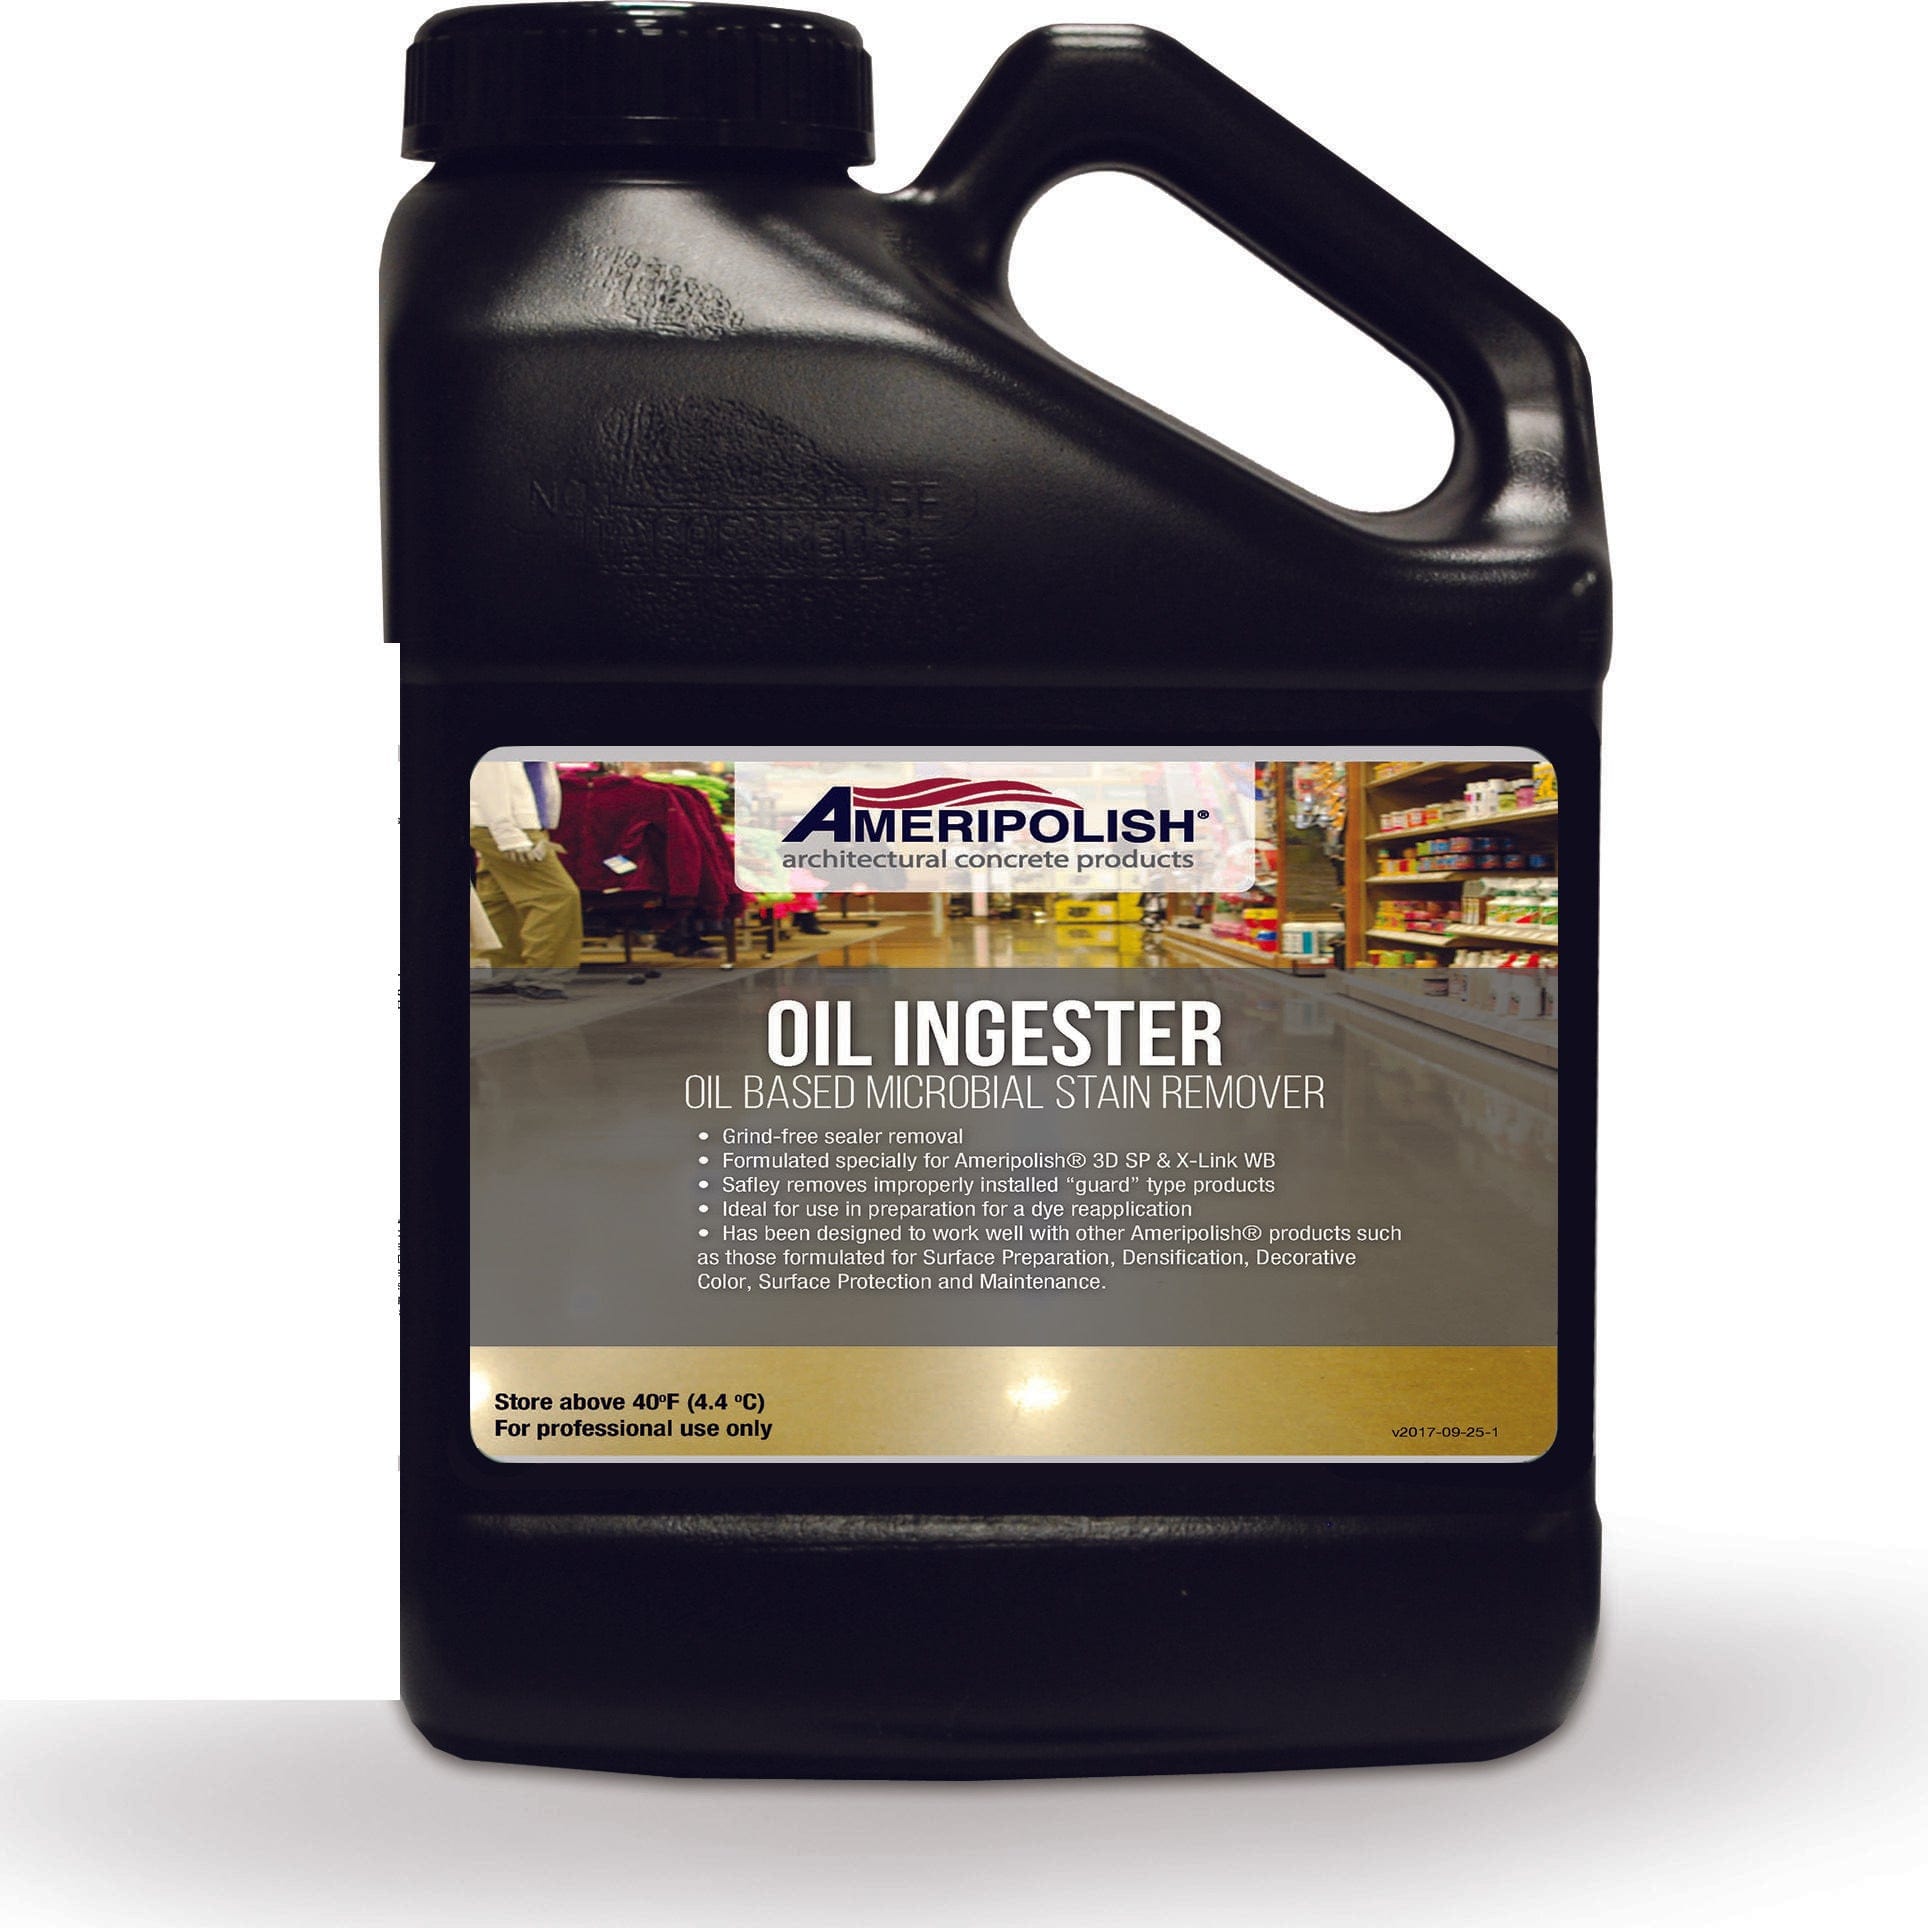 Oil Ingester Concrete Stain Remover - Xtreme Polishing Systems - concrete cleaners, cleaners degreasers, best concrete cleaners, oil remover concrete, degreasers cleaners